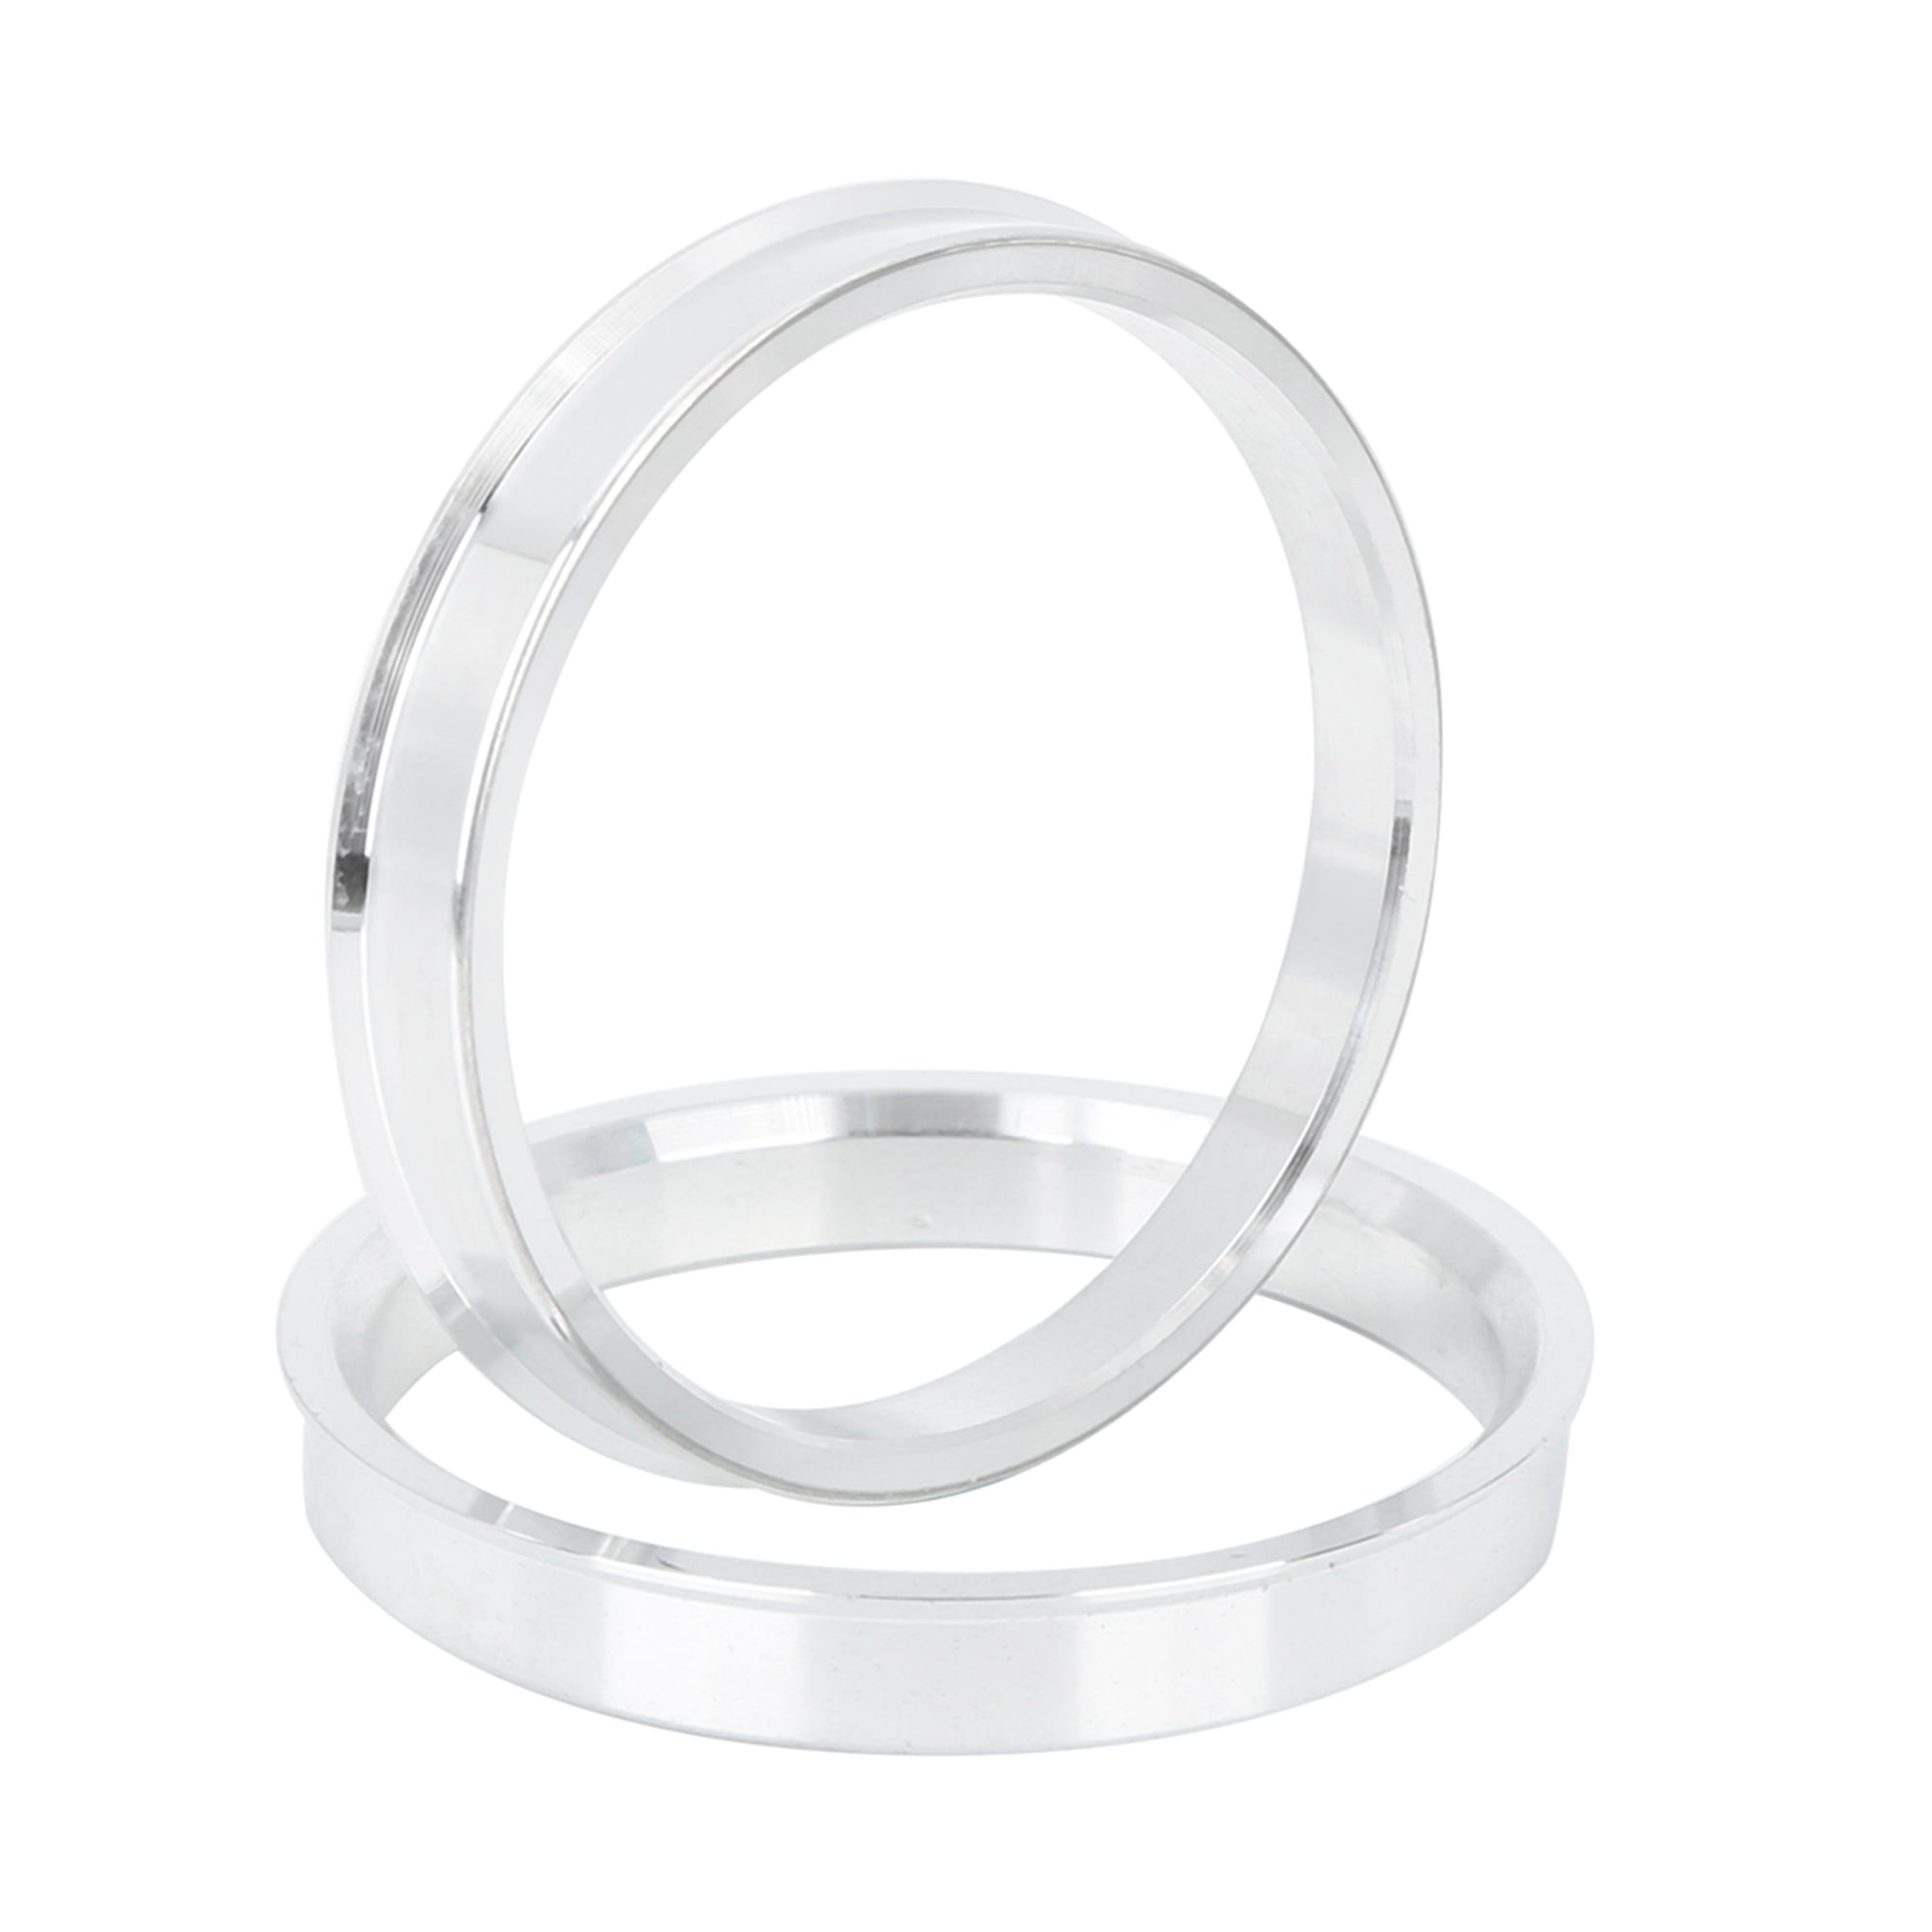 Aluminum Expander Ring  The AmericaSmiles Network